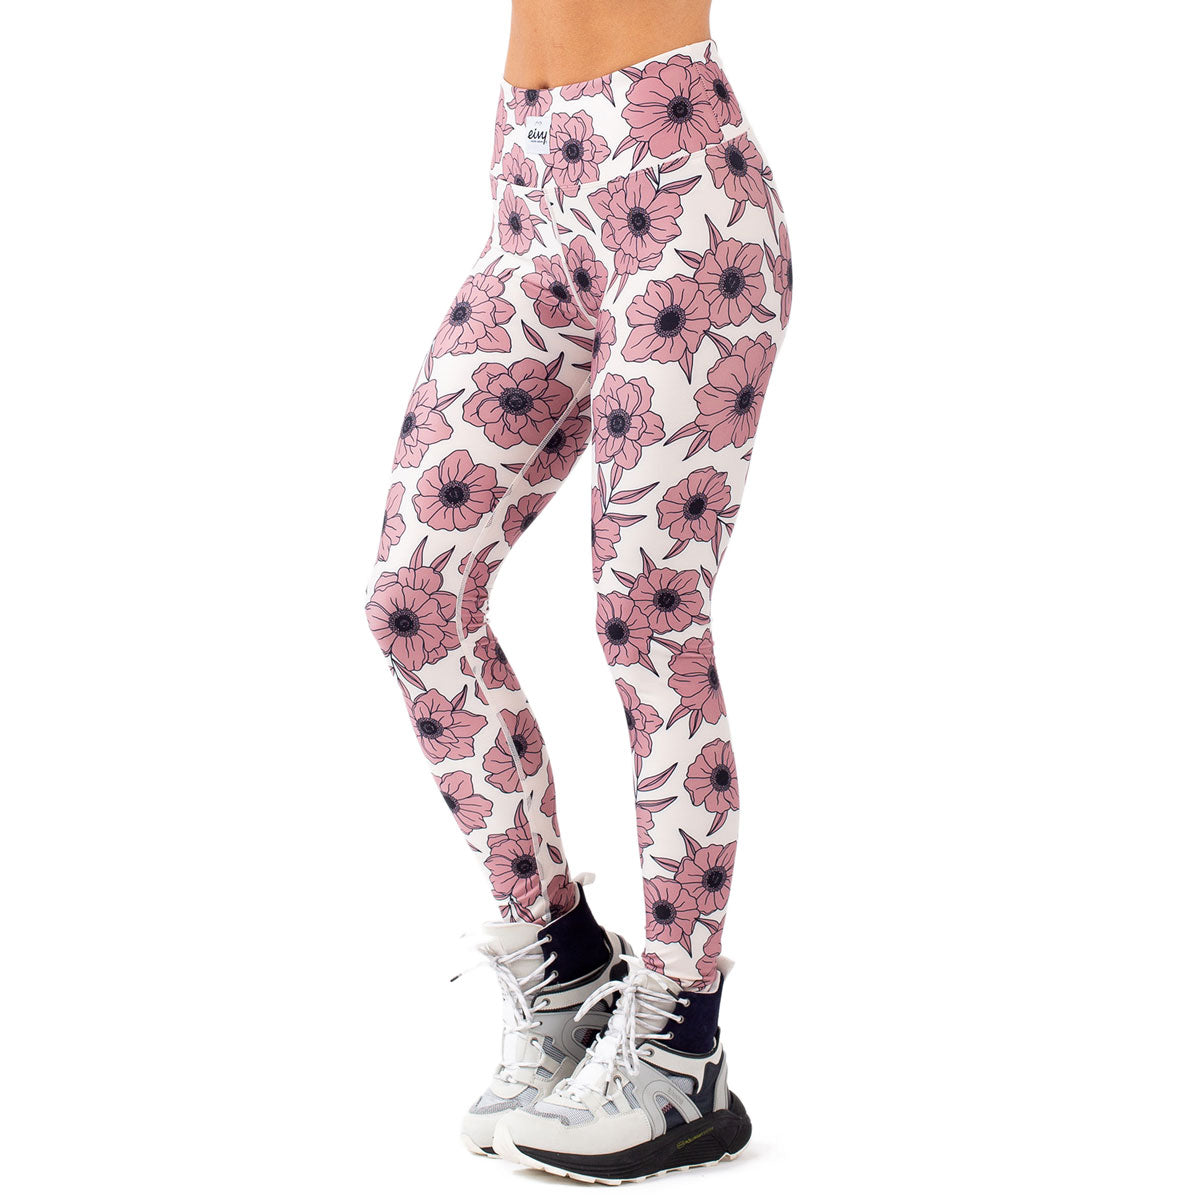 Eivy Icecold Tights Snowboard Base Layer - Wall Flowers image 2